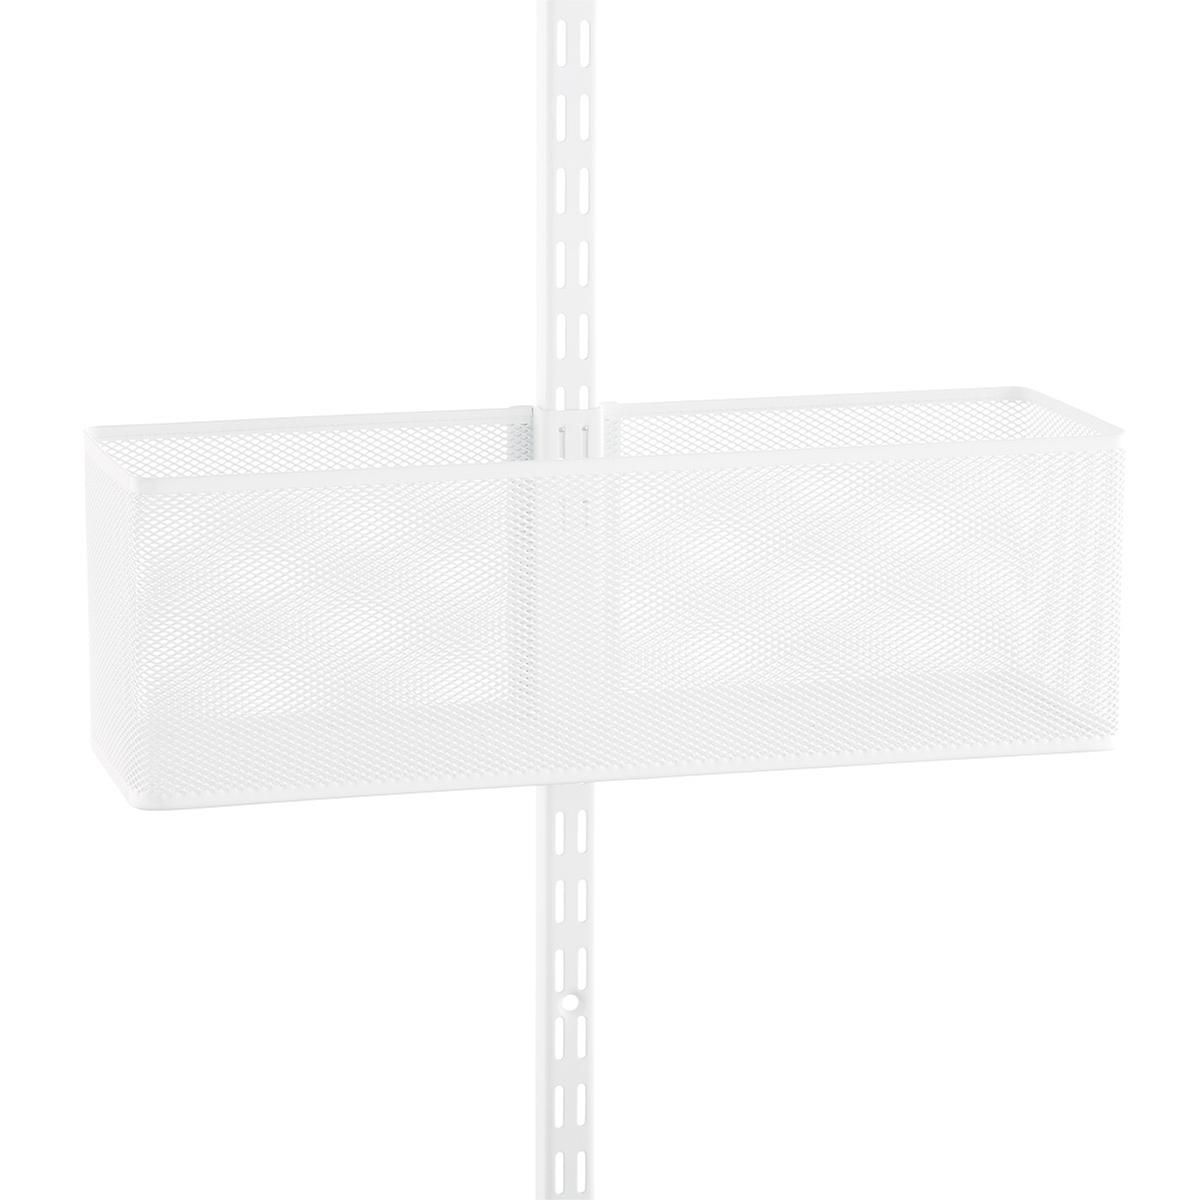 Elfa Utility White Mesh Baskets | The Container Store